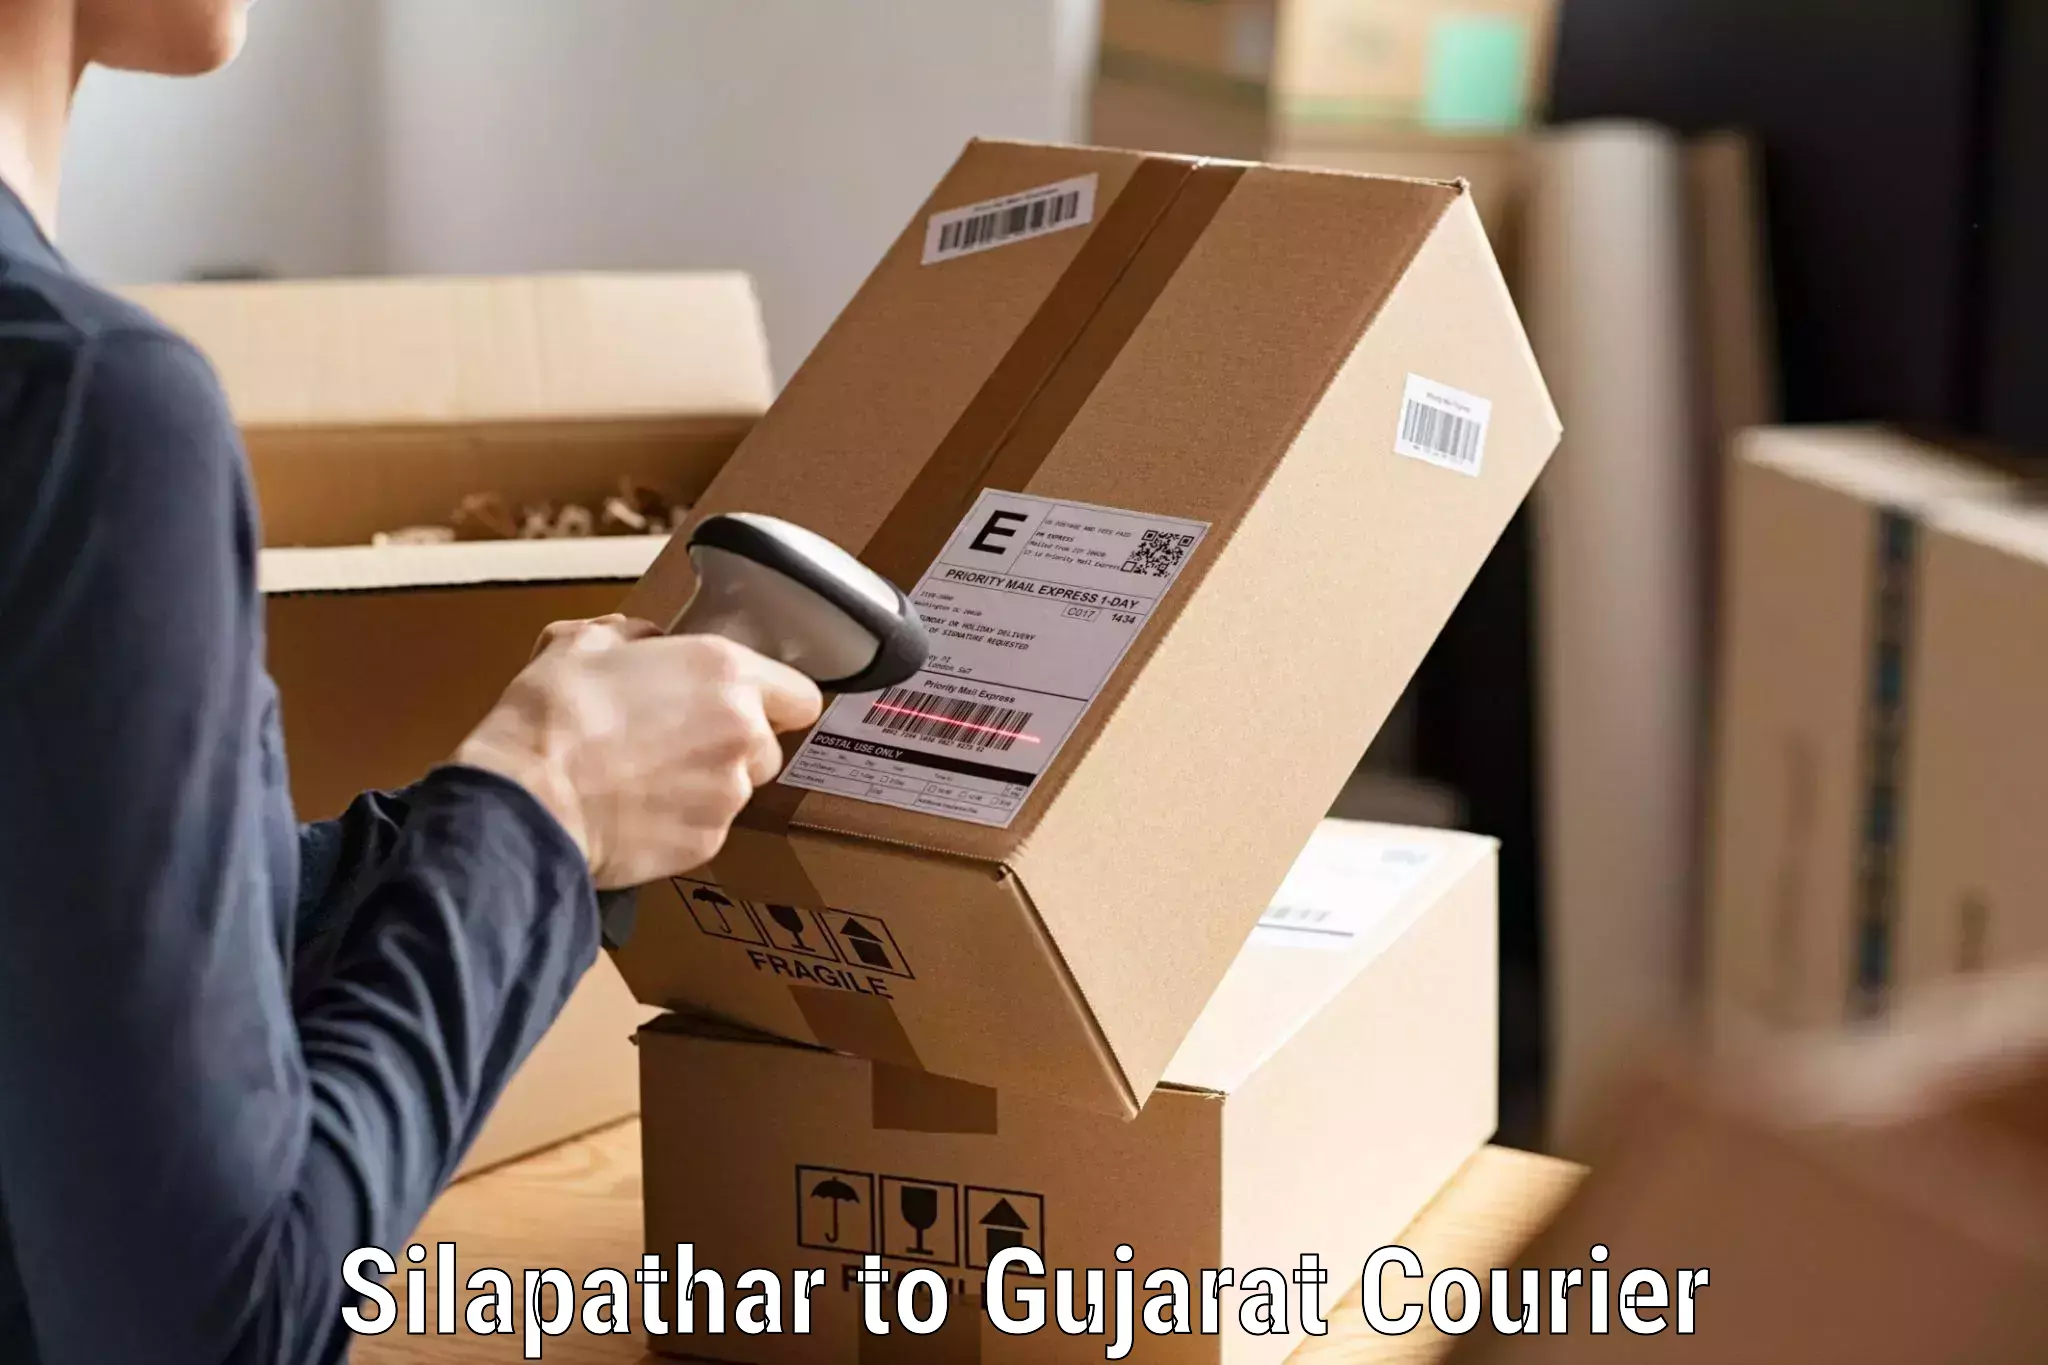 Courier rate comparison Silapathar to Rajpipla